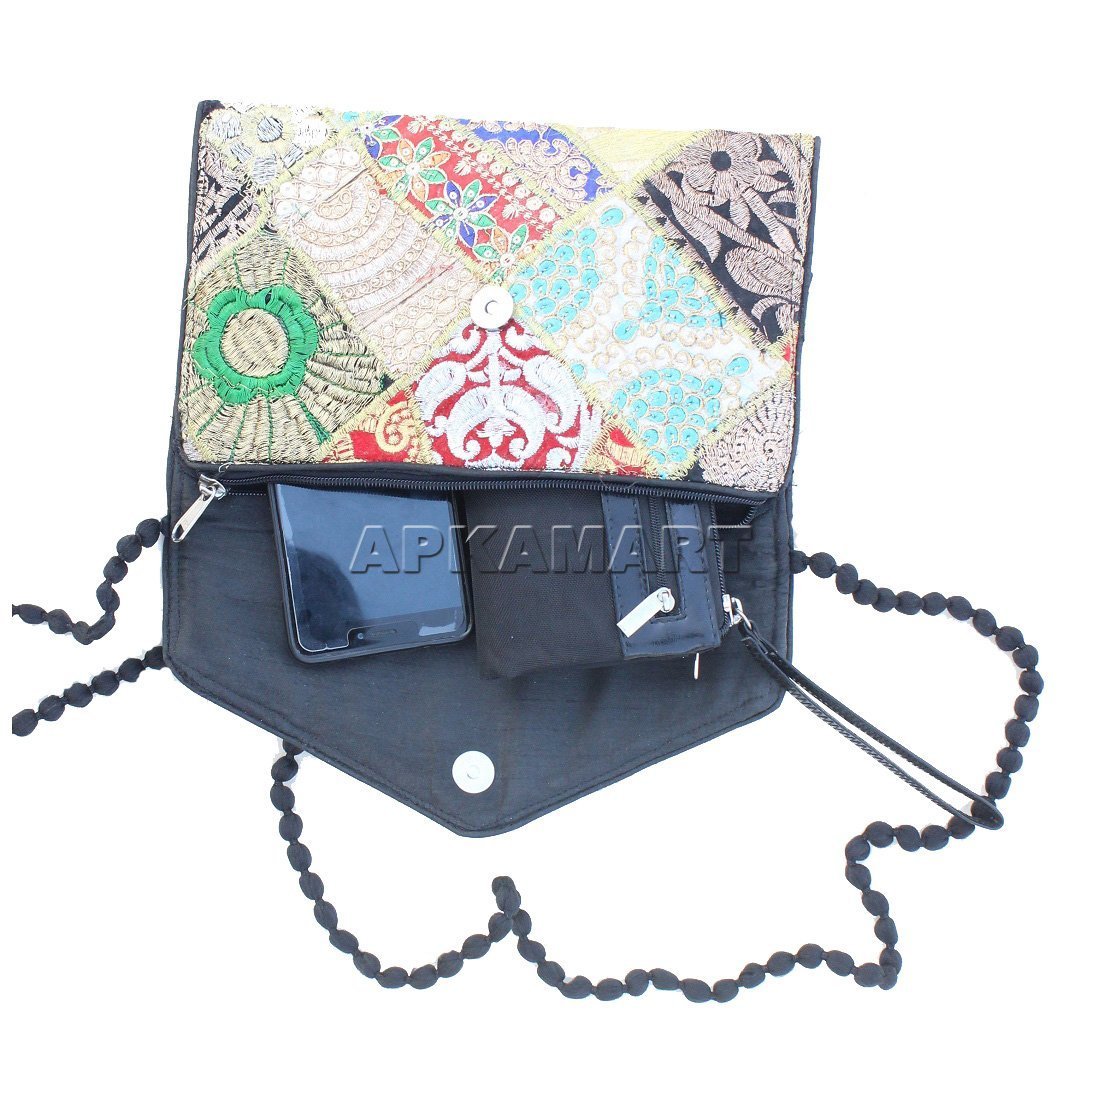 Floral Embroidery Handbag Trendy Faux Leather Satchel Bag, Women's Office & Work  Purse | Wish